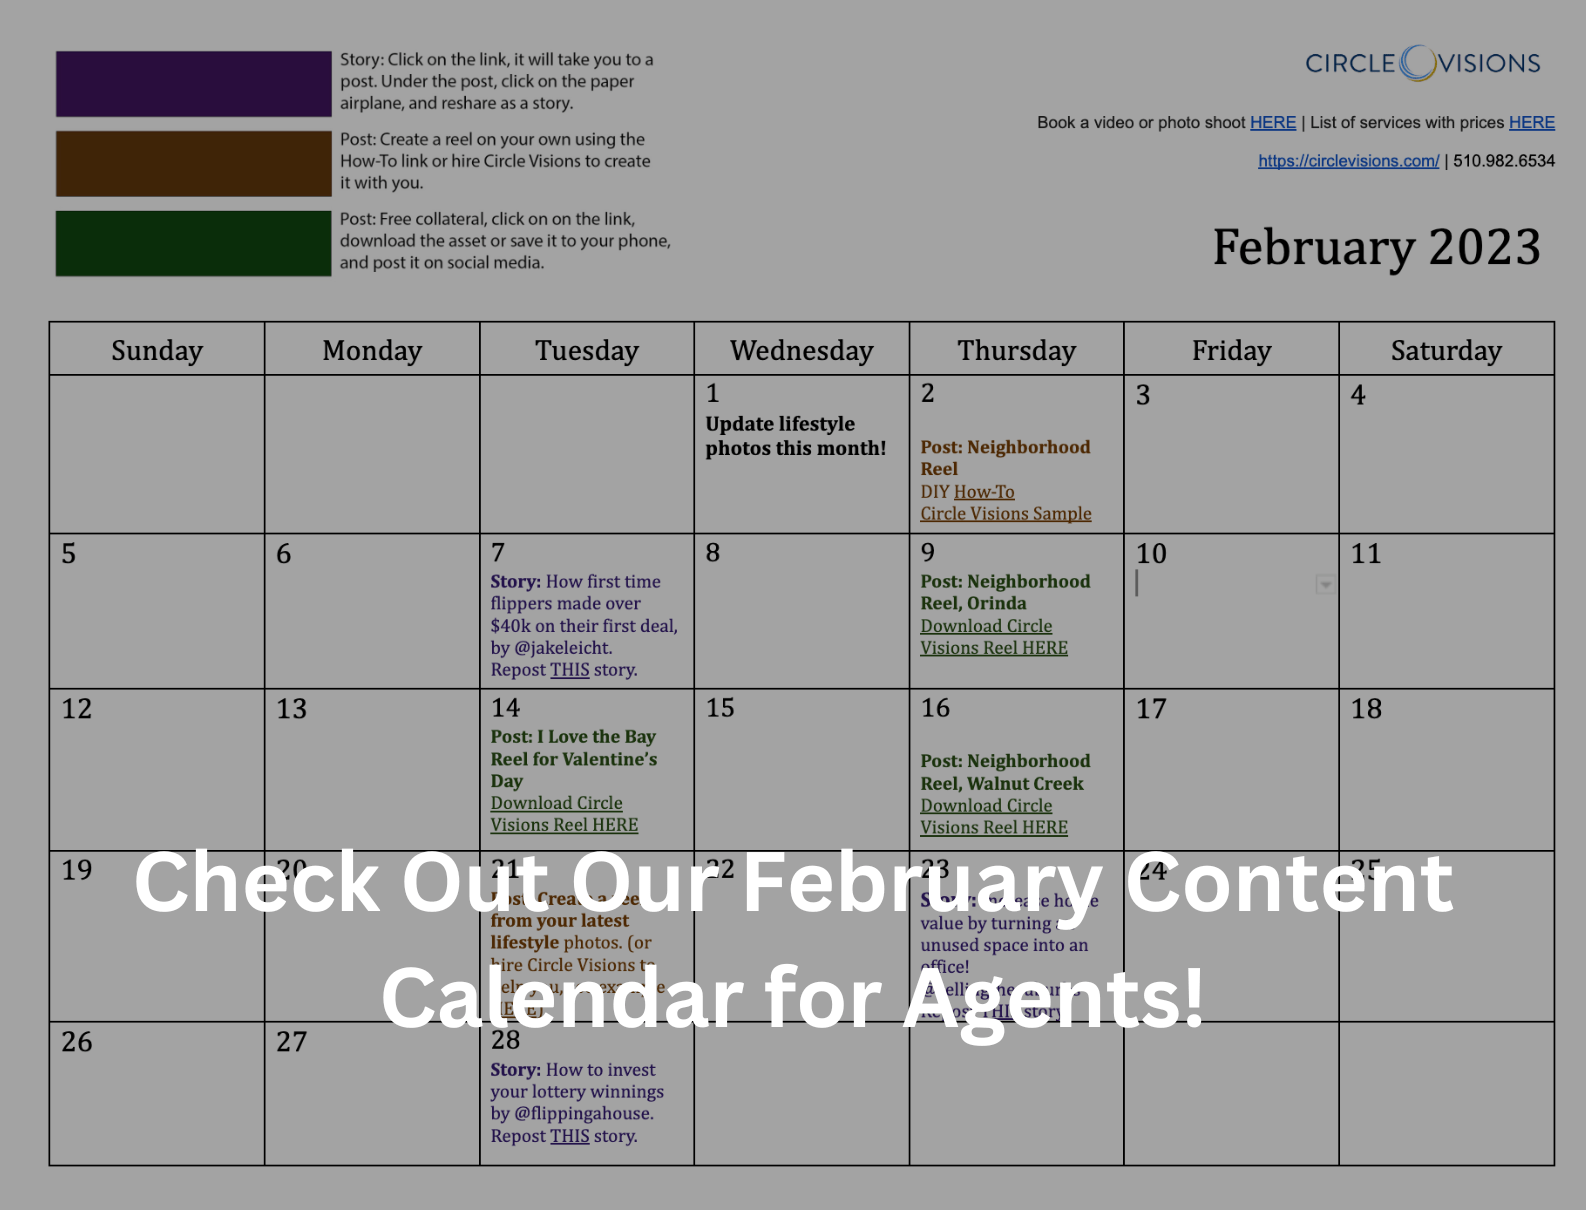 You are currently viewing Check Out Our February Content Calendar for Agents!<br>Free/DIY Video Content for Social Media or Your Personal Website